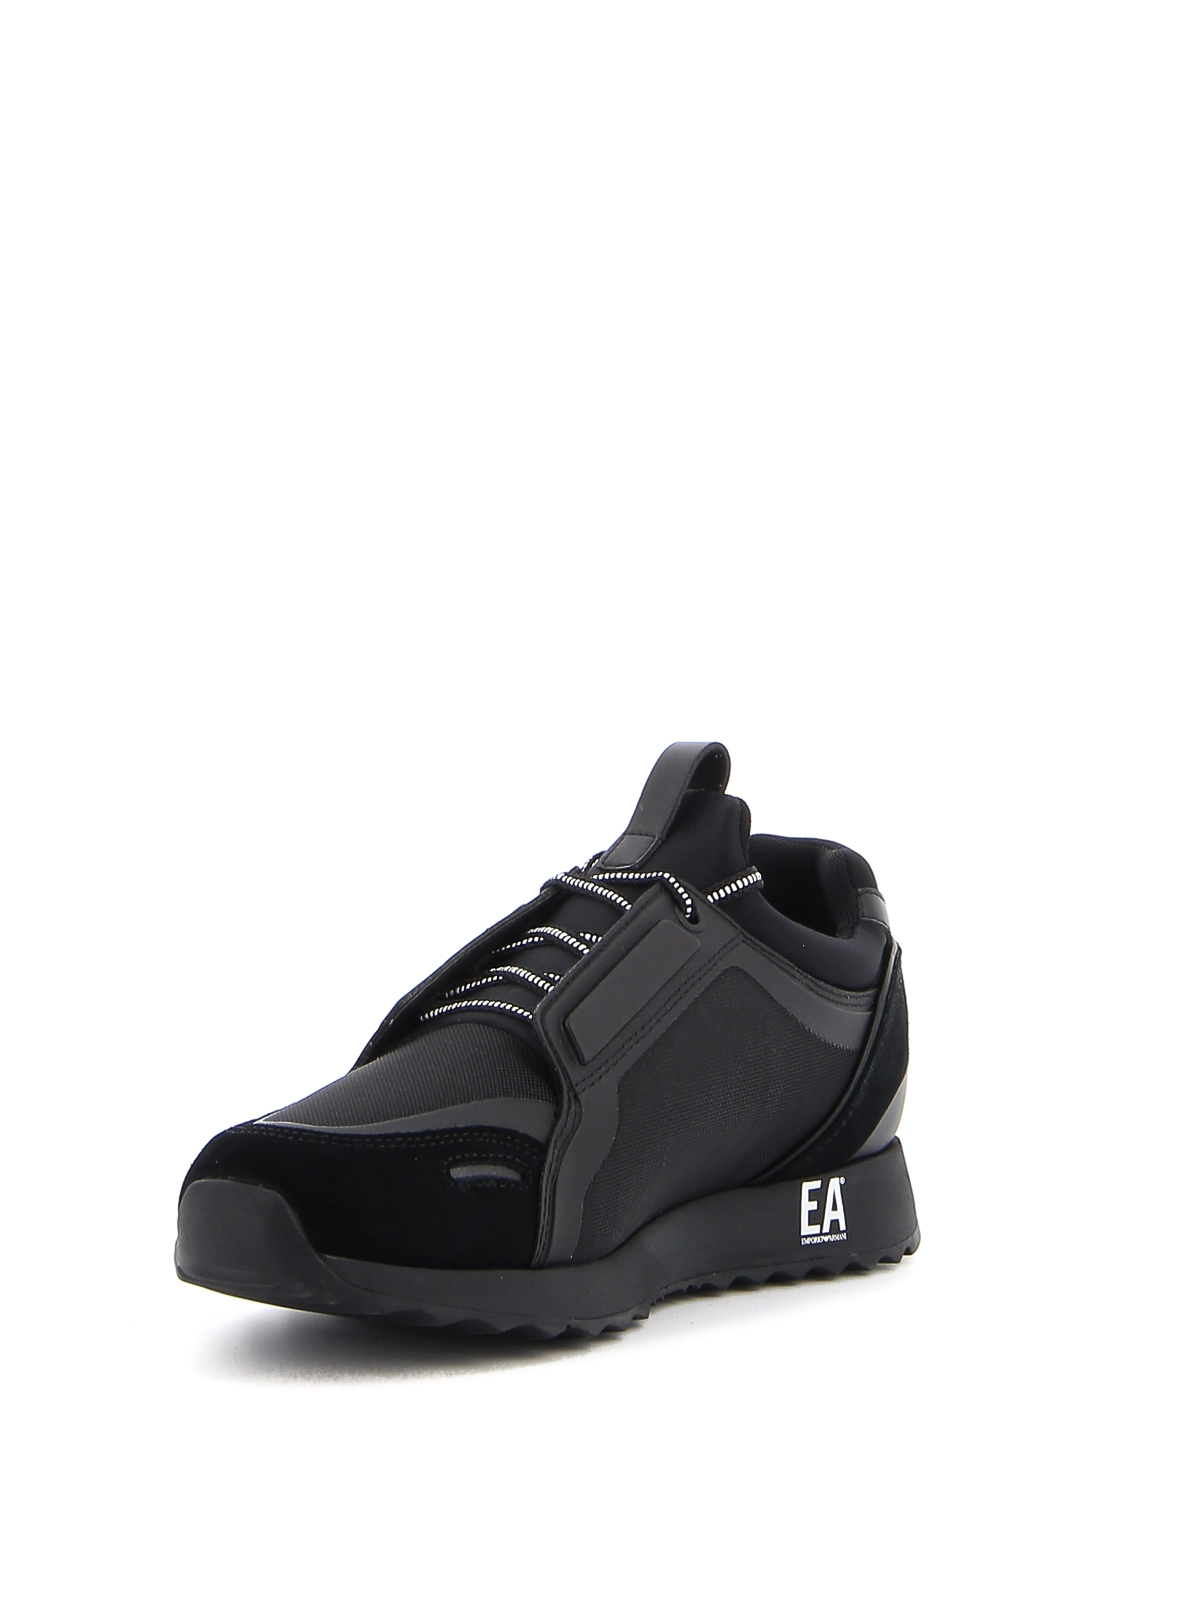 Havoc belief two weeks Trainers Emporio Armani - Ripstop Generation sneakers - X4X314XM493M994